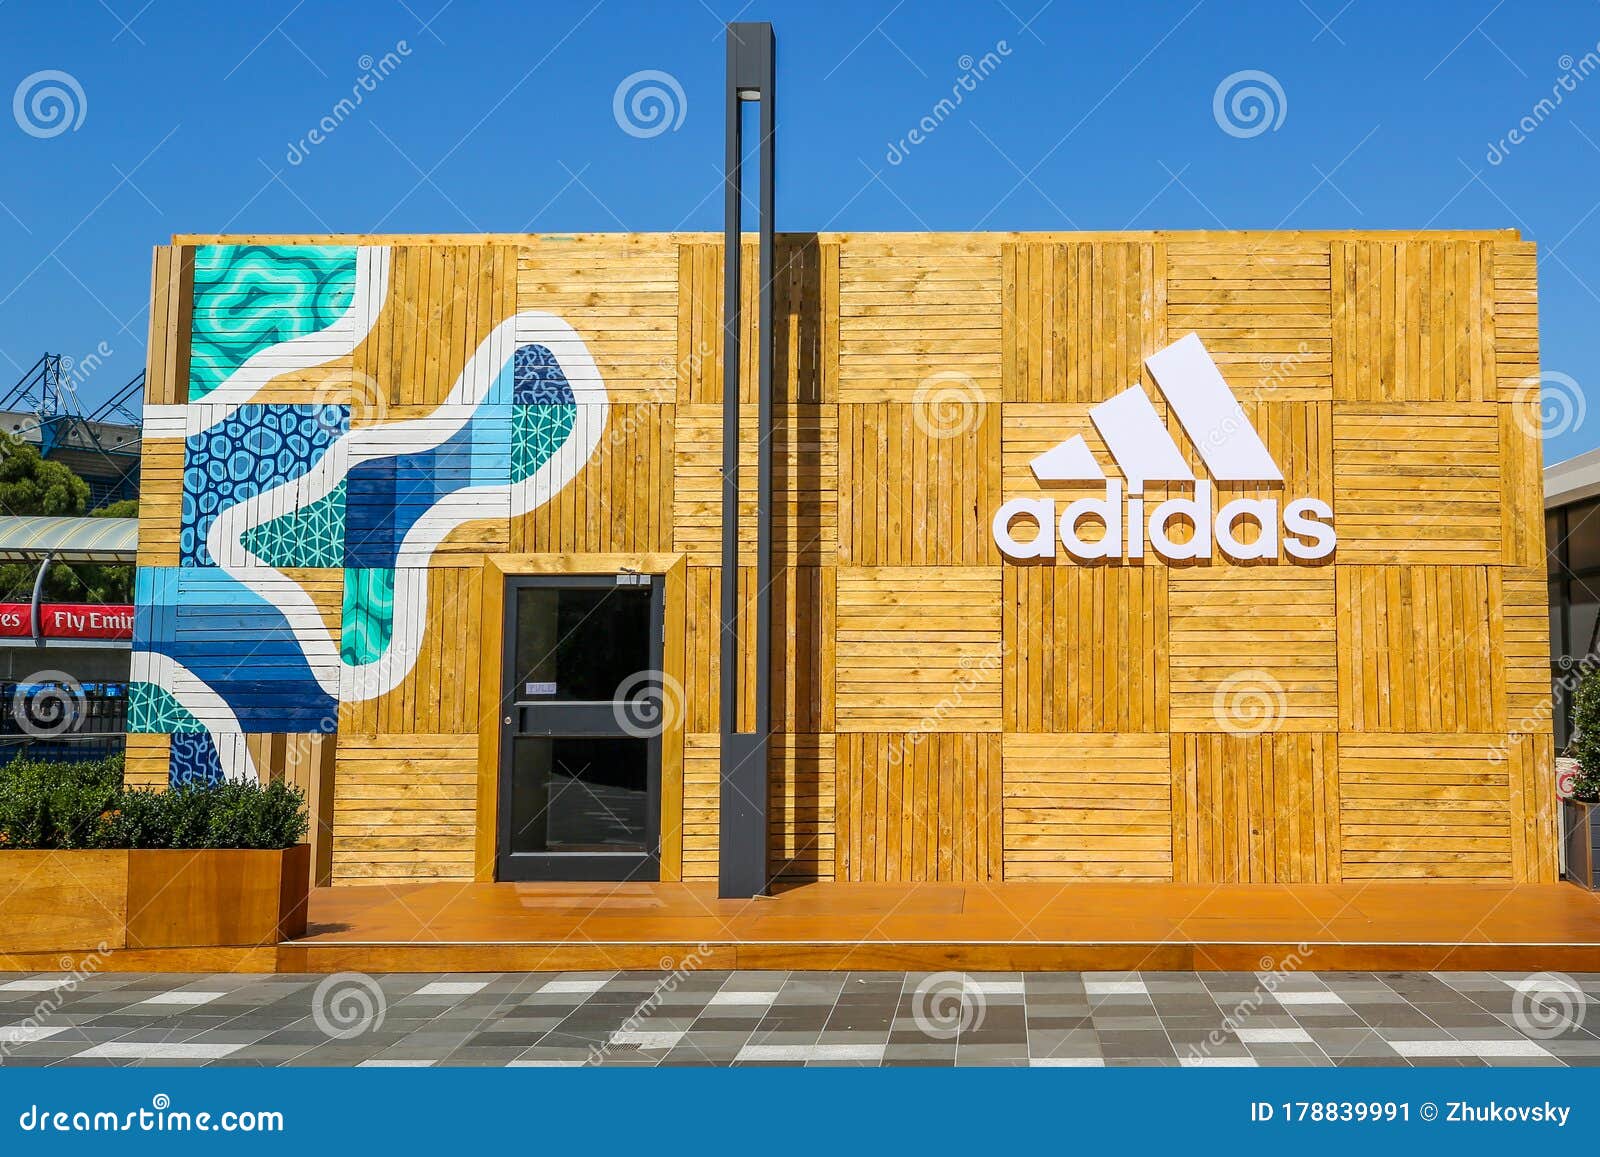 Adidas Store in Melbourne Olympic Park during 2019 Australian Open  Editorial Photo - Image of australia, melbourne: 178839991